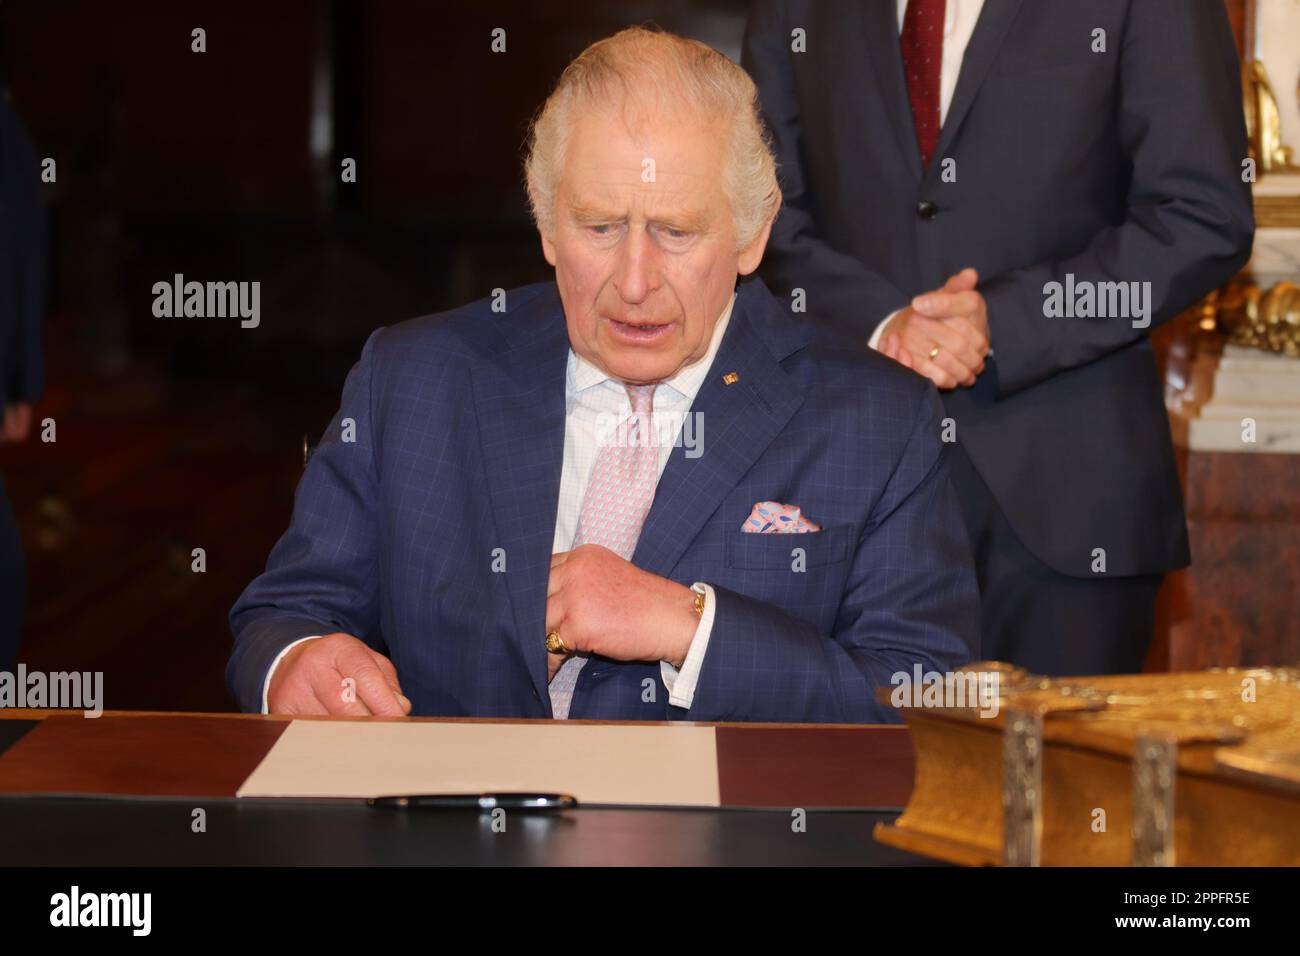 King Charles III,state visit to Hamburg,31.03.2023,entry in the golden book Stock Photo